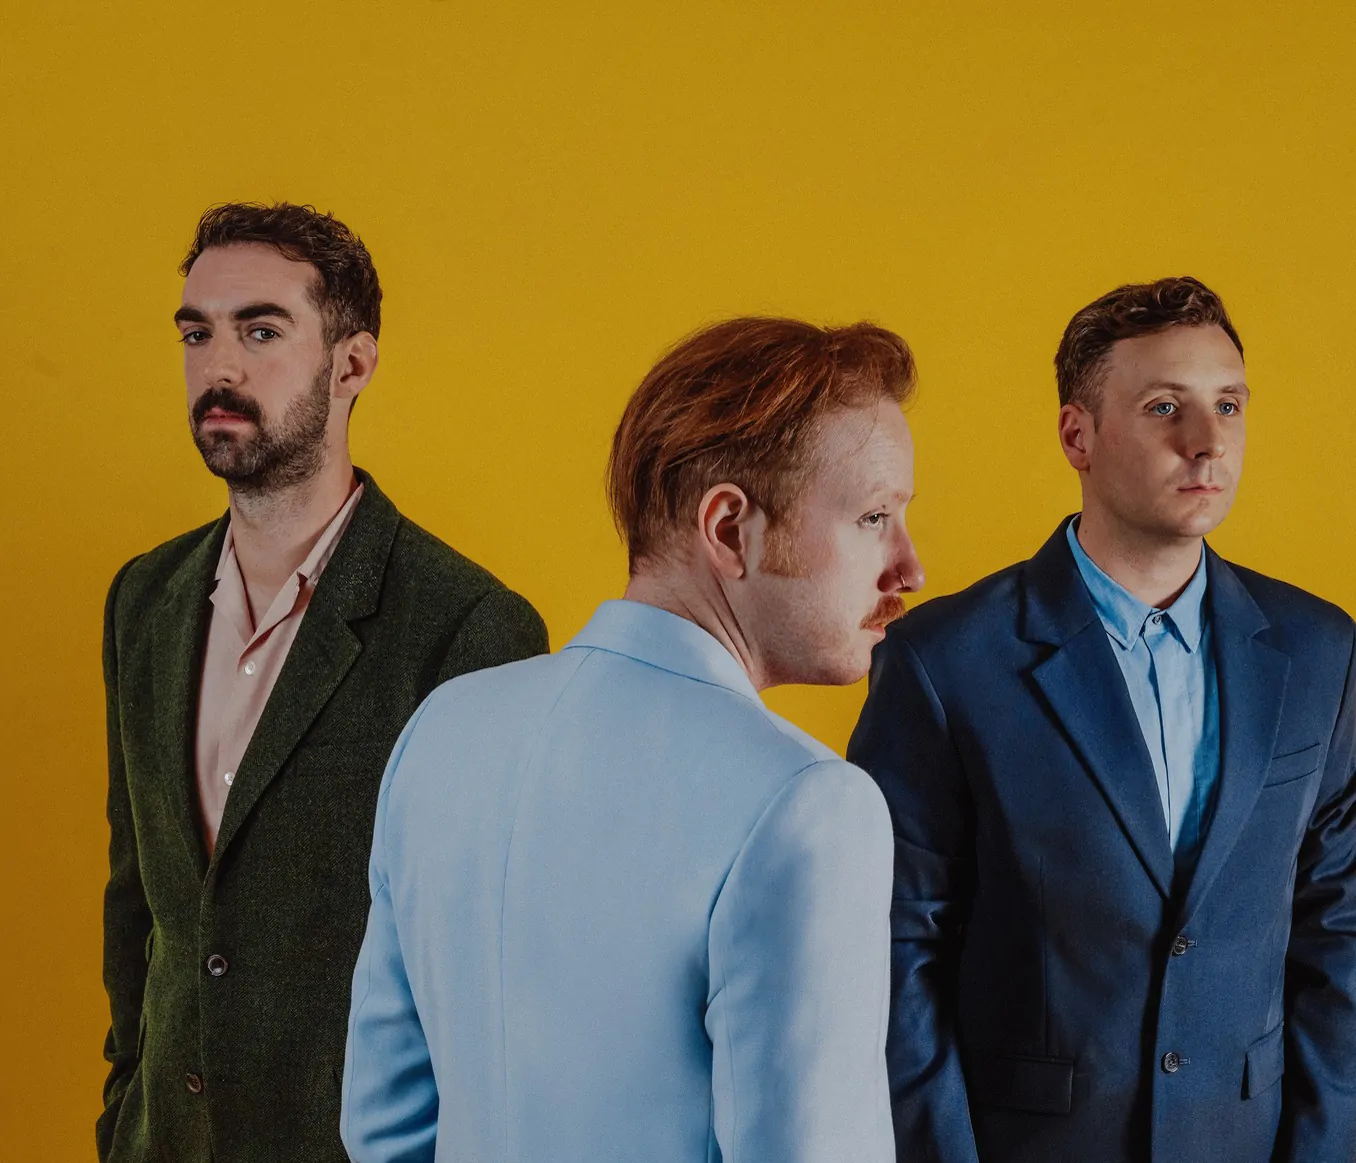 TWO DOOR CINEMA CLUB return to Belfast with a show at The Telegraph Building on Thursday 13th April